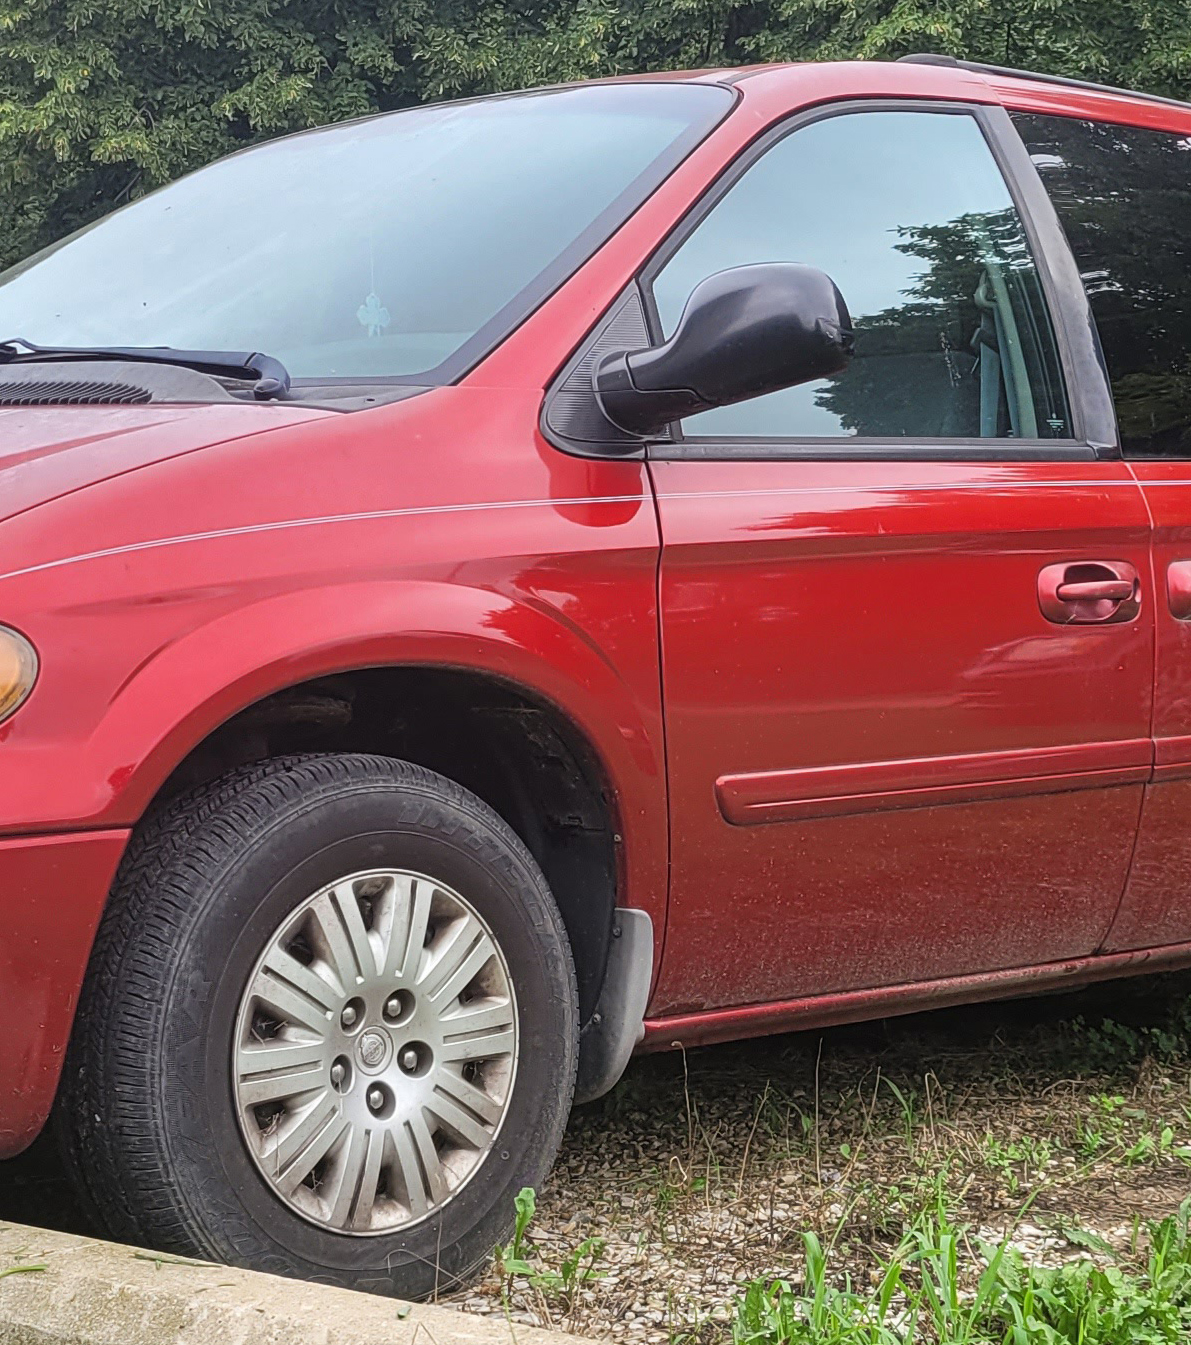 A 2006 red Chrysler Town and Country van.